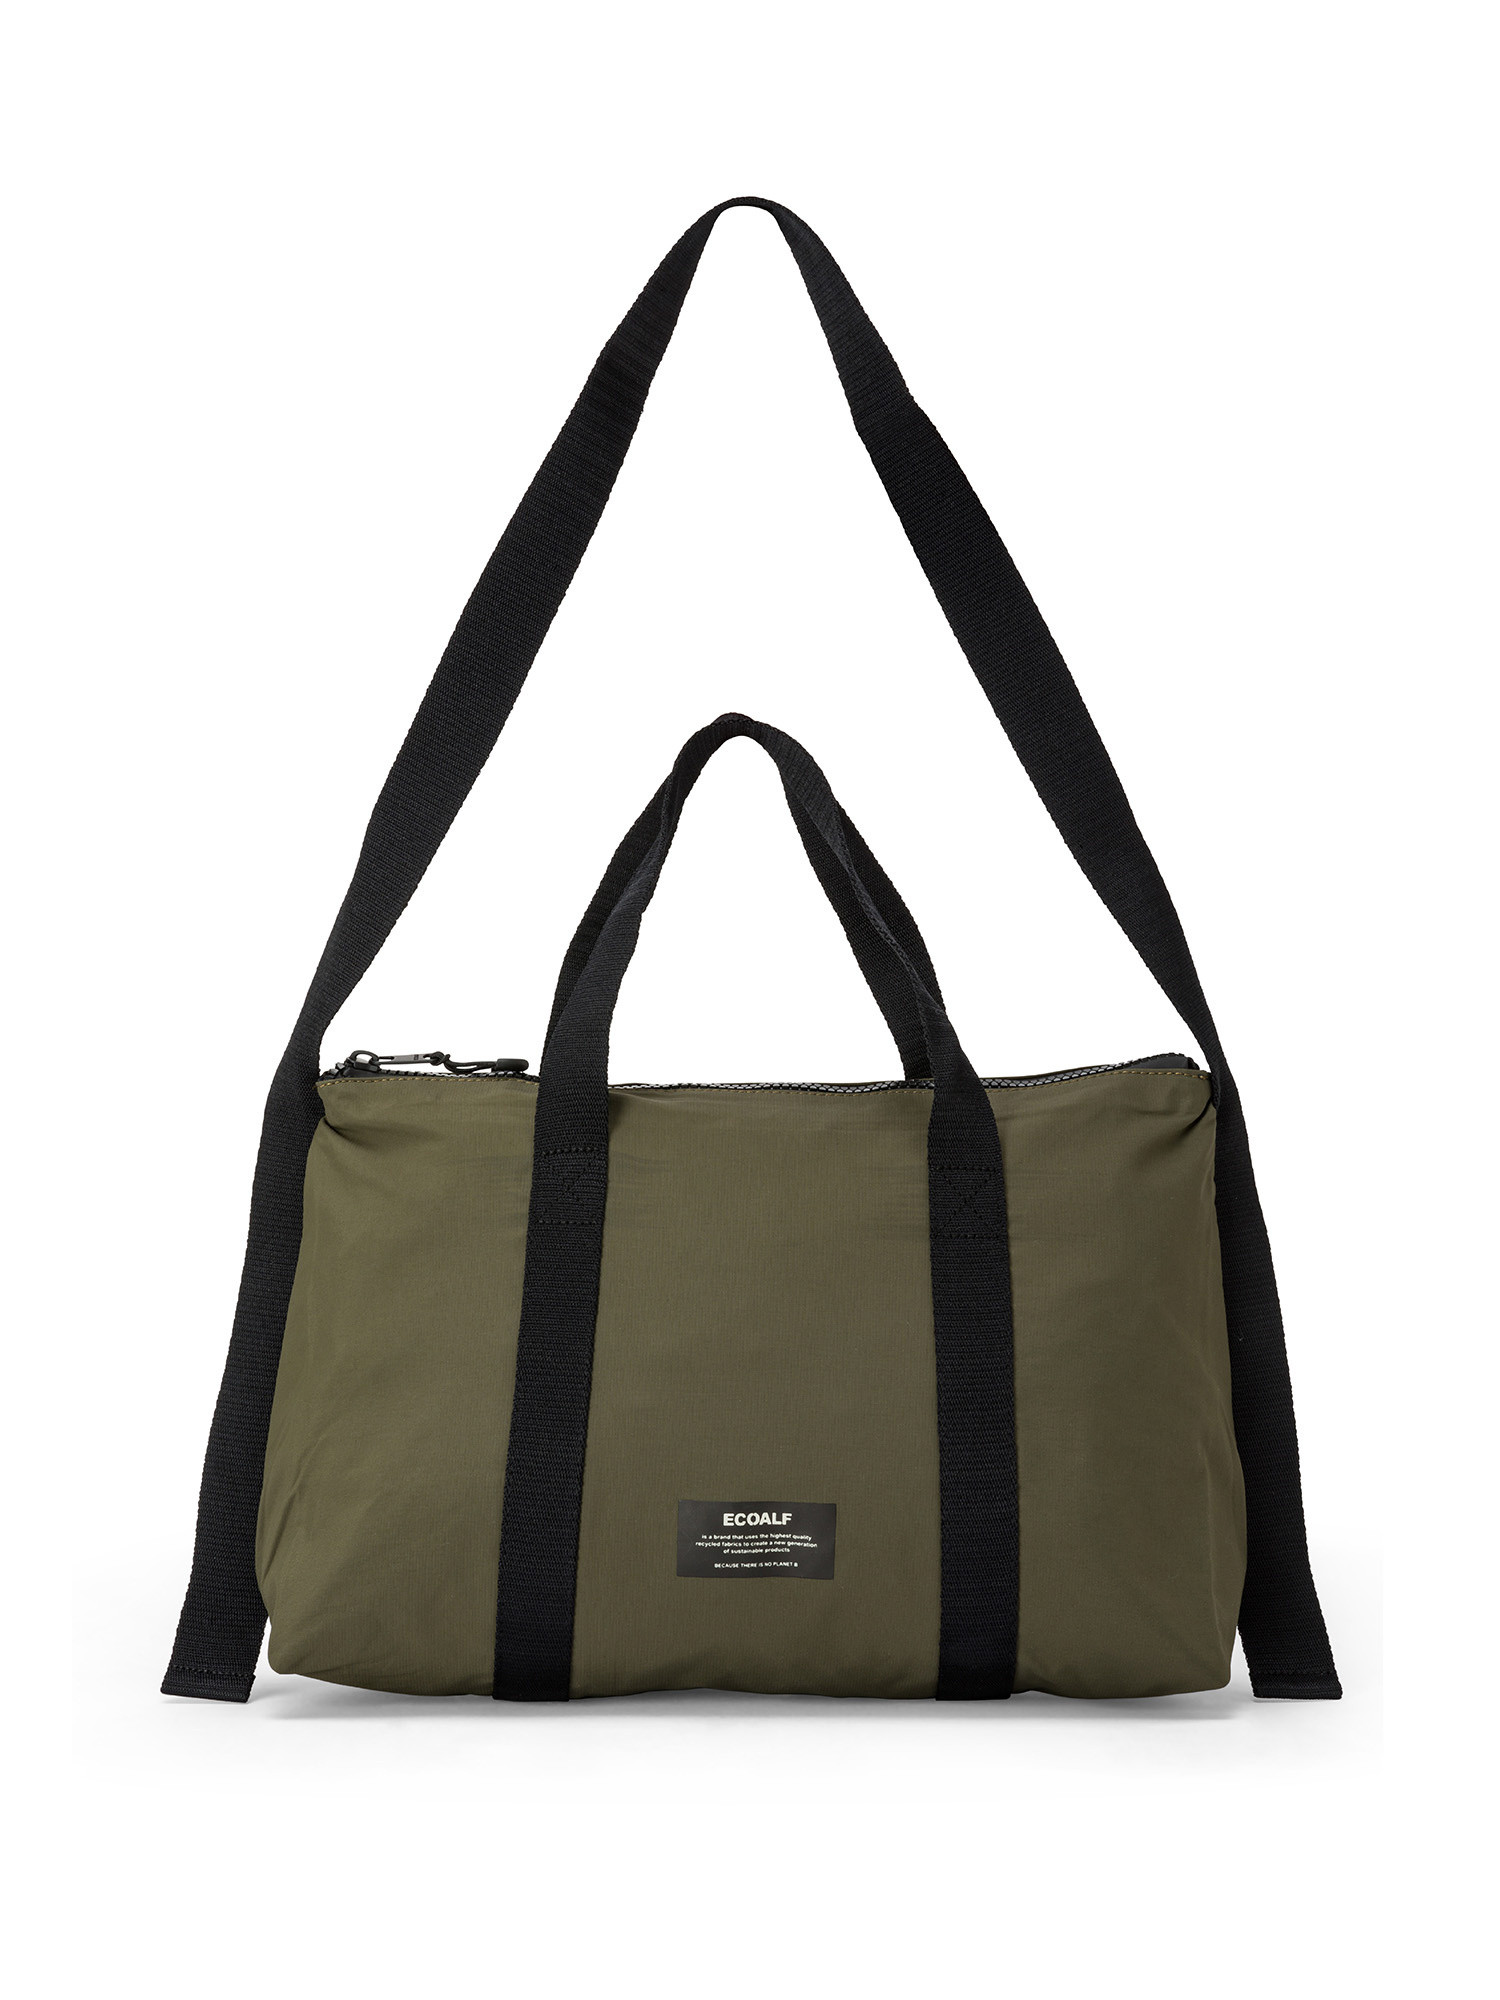 Ecoalf - Rio bag with logo, Olive Green, large image number 0